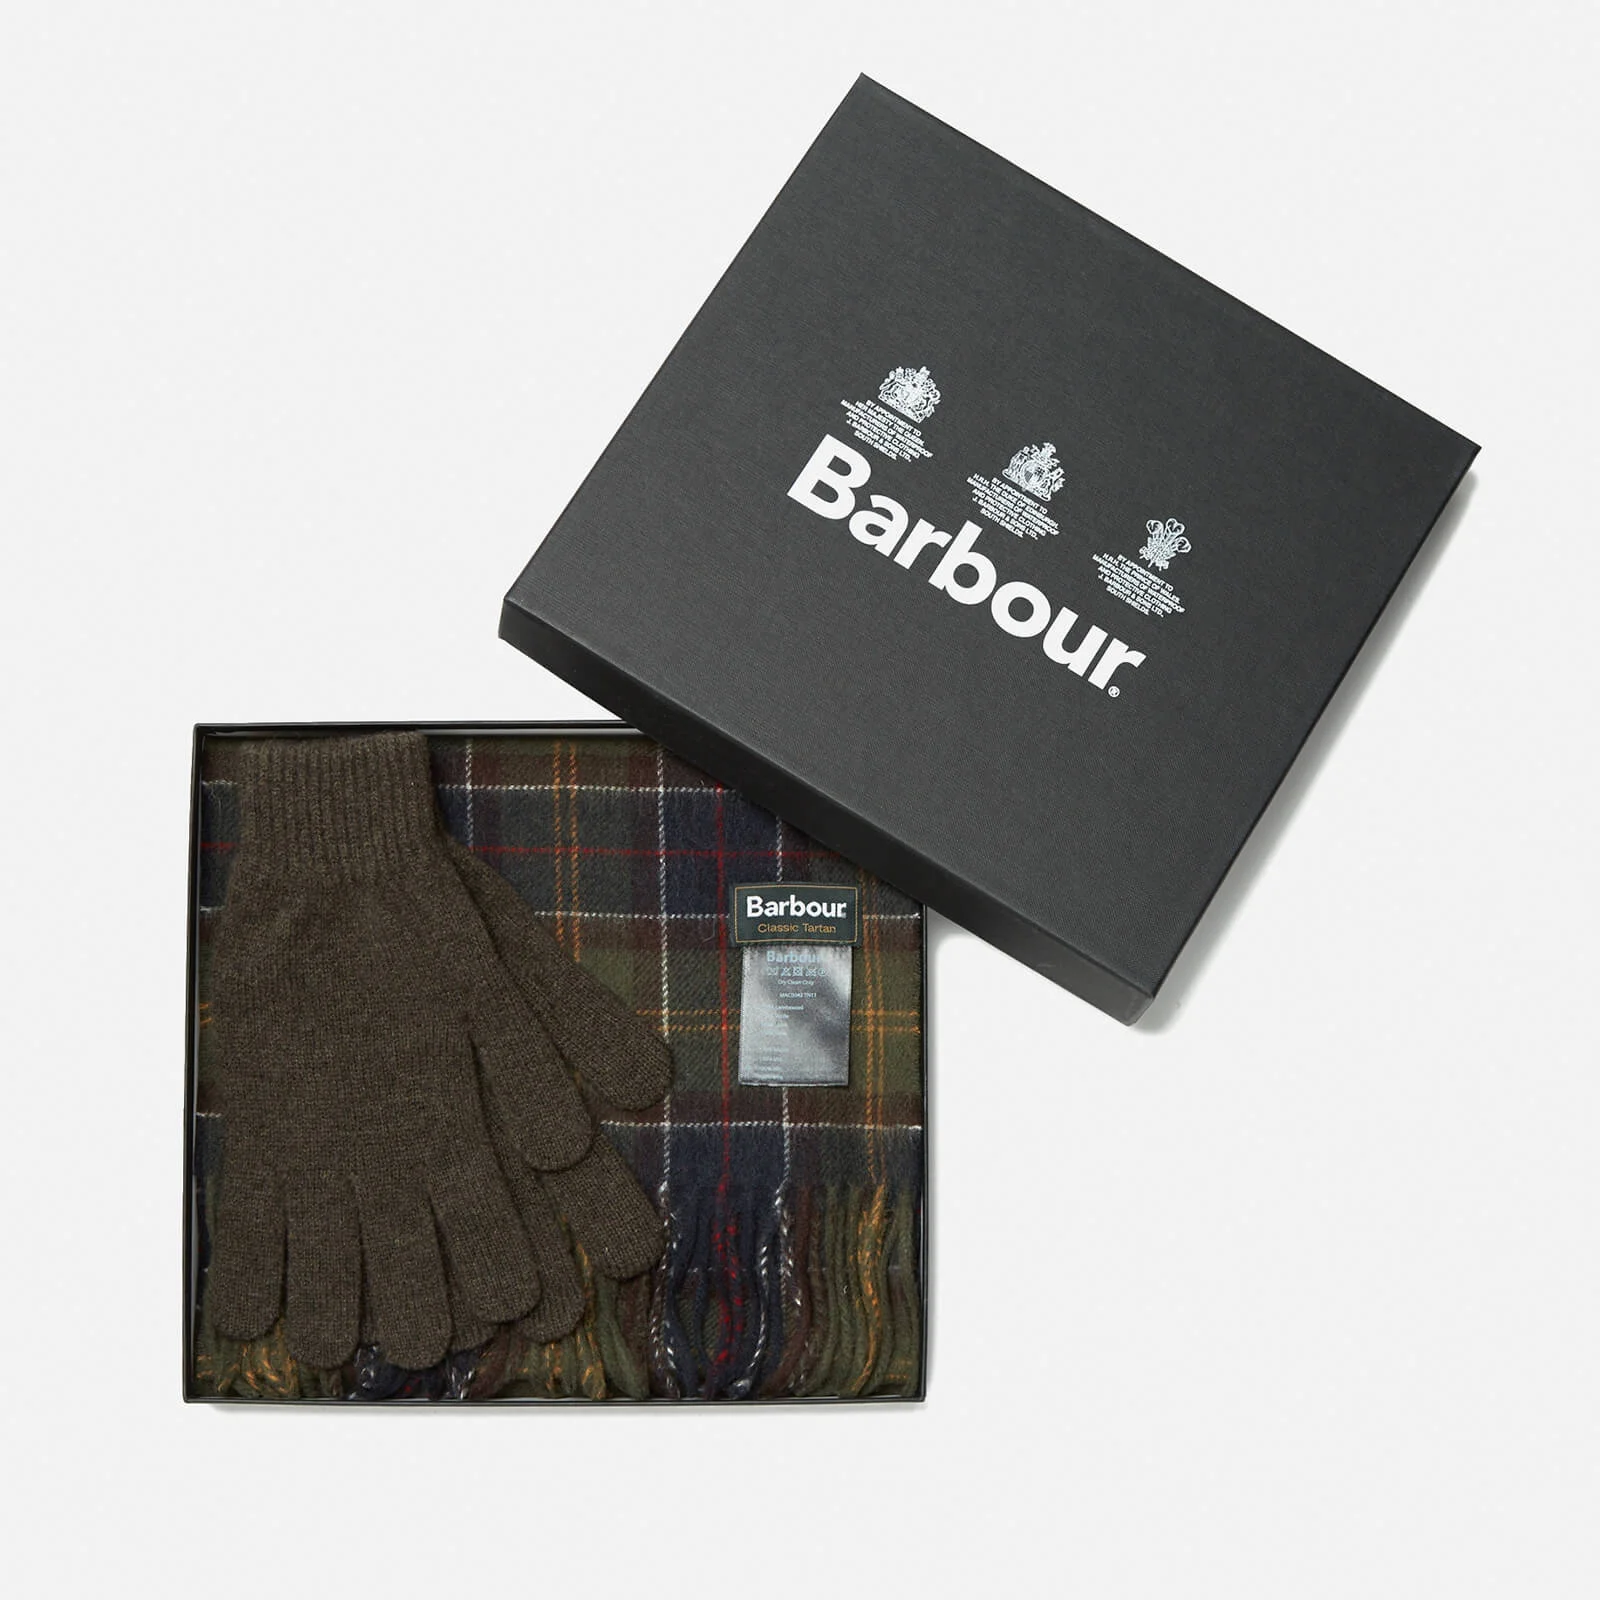 Barbour Men's Scarf And Glove Gift Set - Classic/Olive Image 1